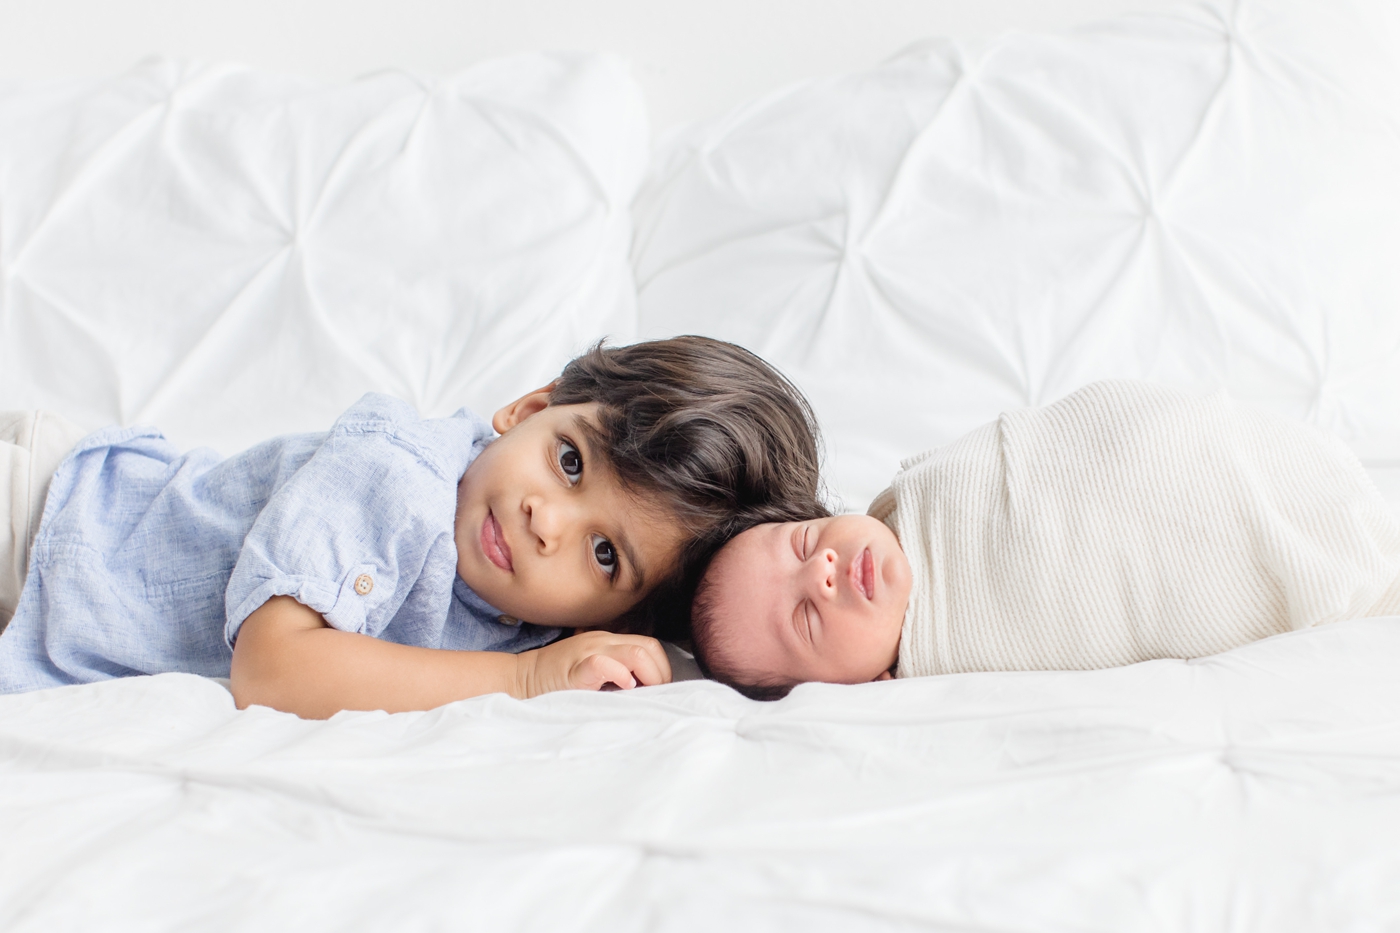 Sweet moment where big brother laid next to baby during newborn session in Austin TX. Photo by Sana Ahmed Photography.